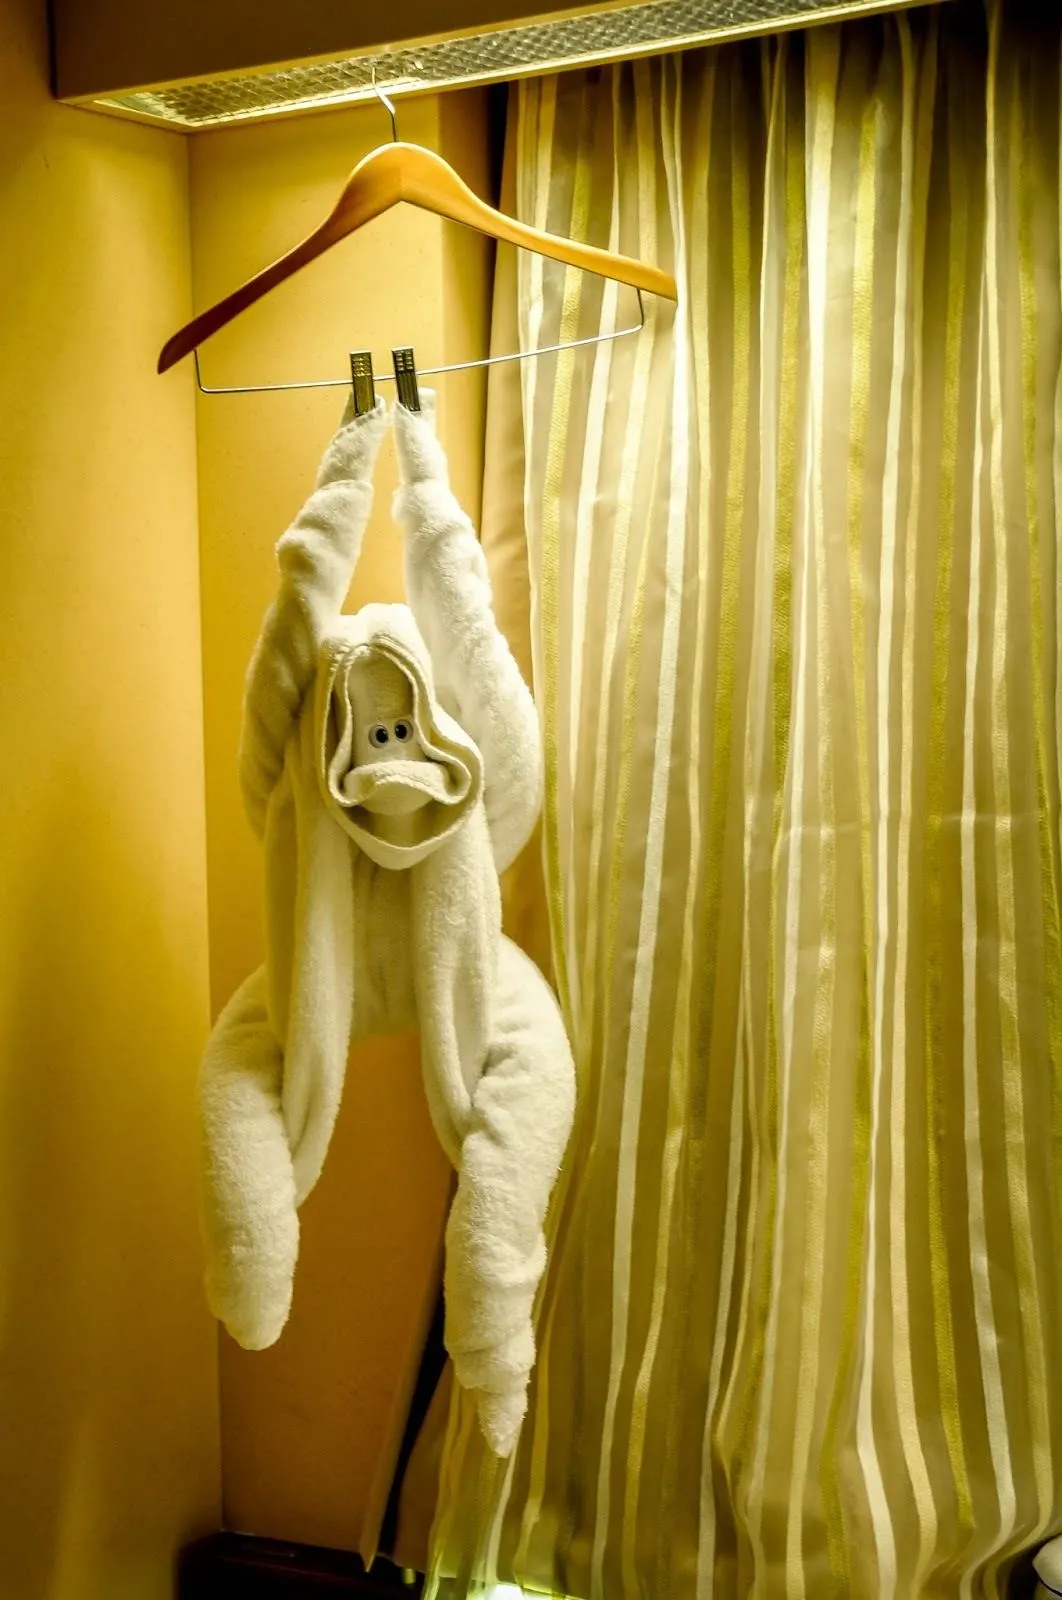 Towel monkey hanging from hanger by clothespins